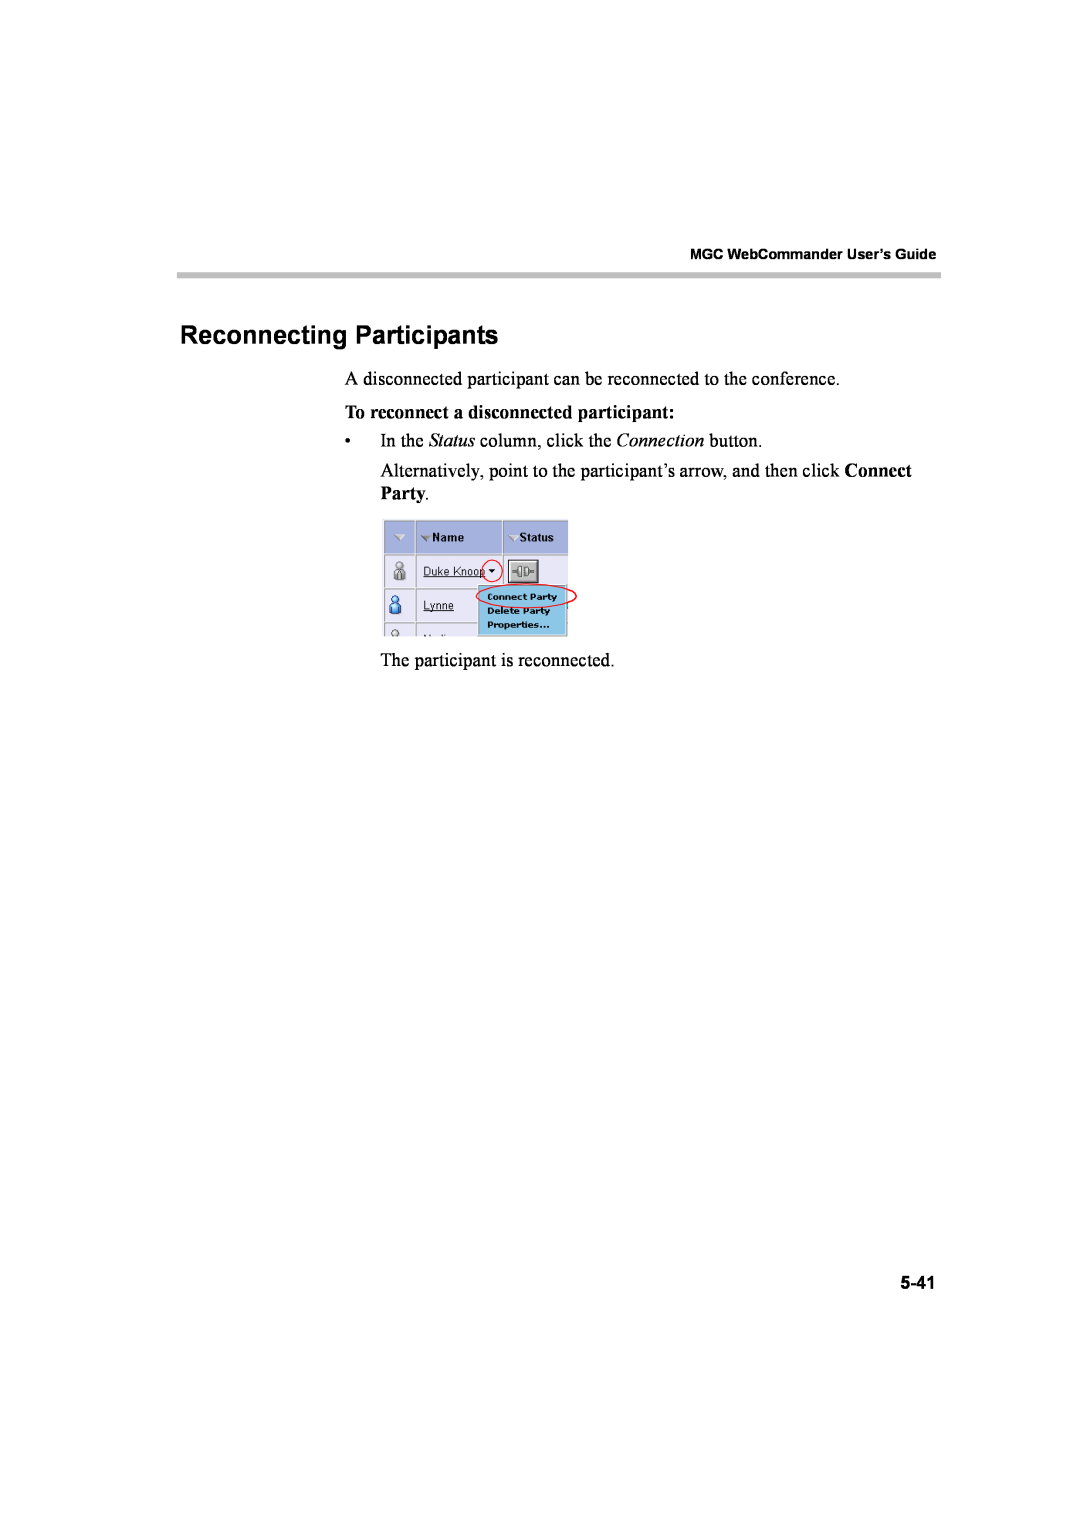 Polycom 8 manual Reconnecting Participants, To reconnect a disconnected participant, 5-41, MGC WebCommander User’s Guide 